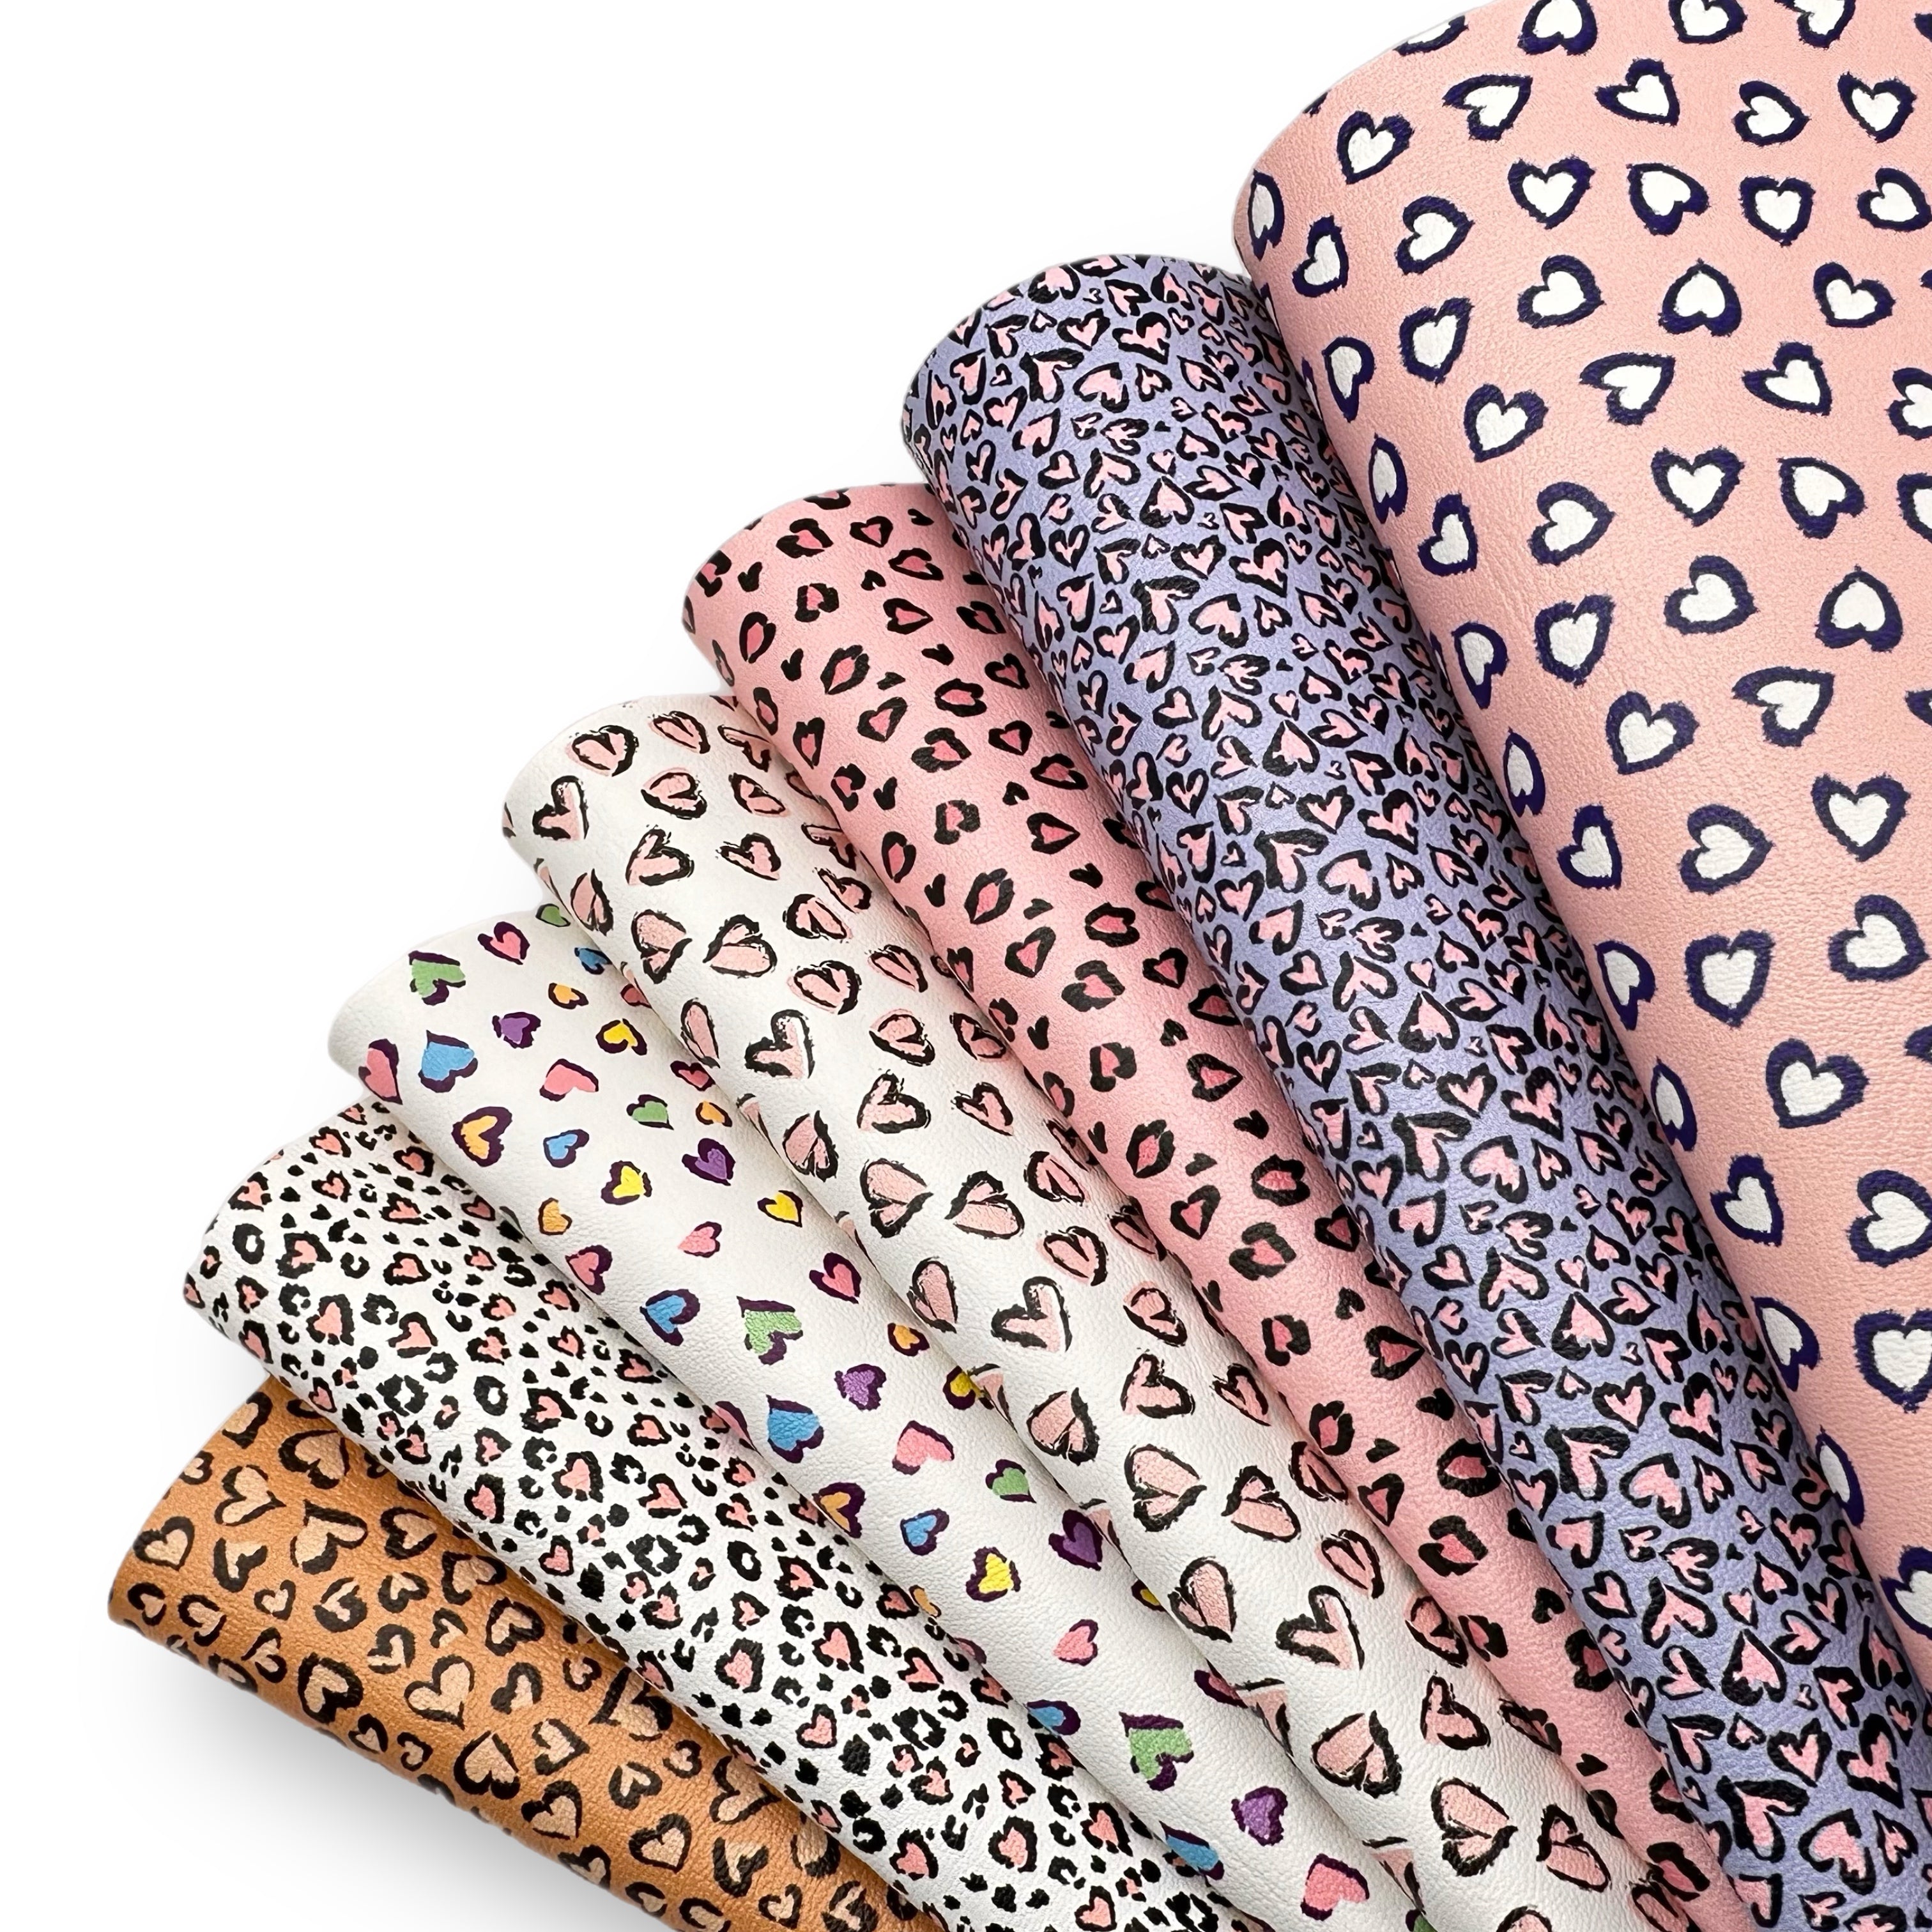 Perfect Leopard Hearts Premium Faux Leather Fabric Collection